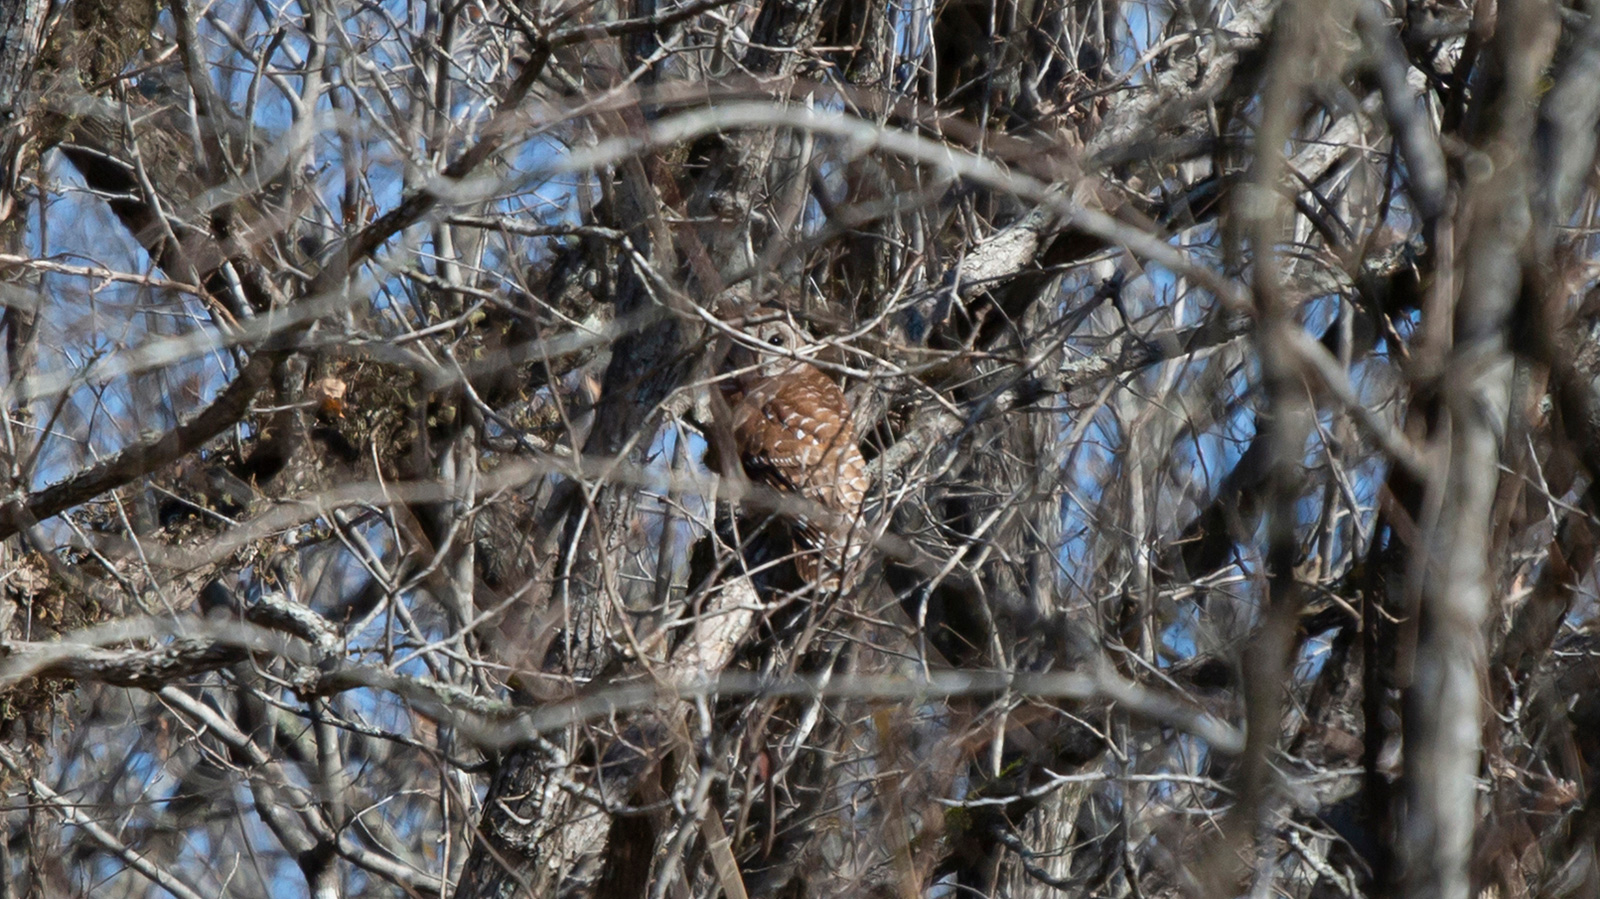 Barred owl on a tree trunk